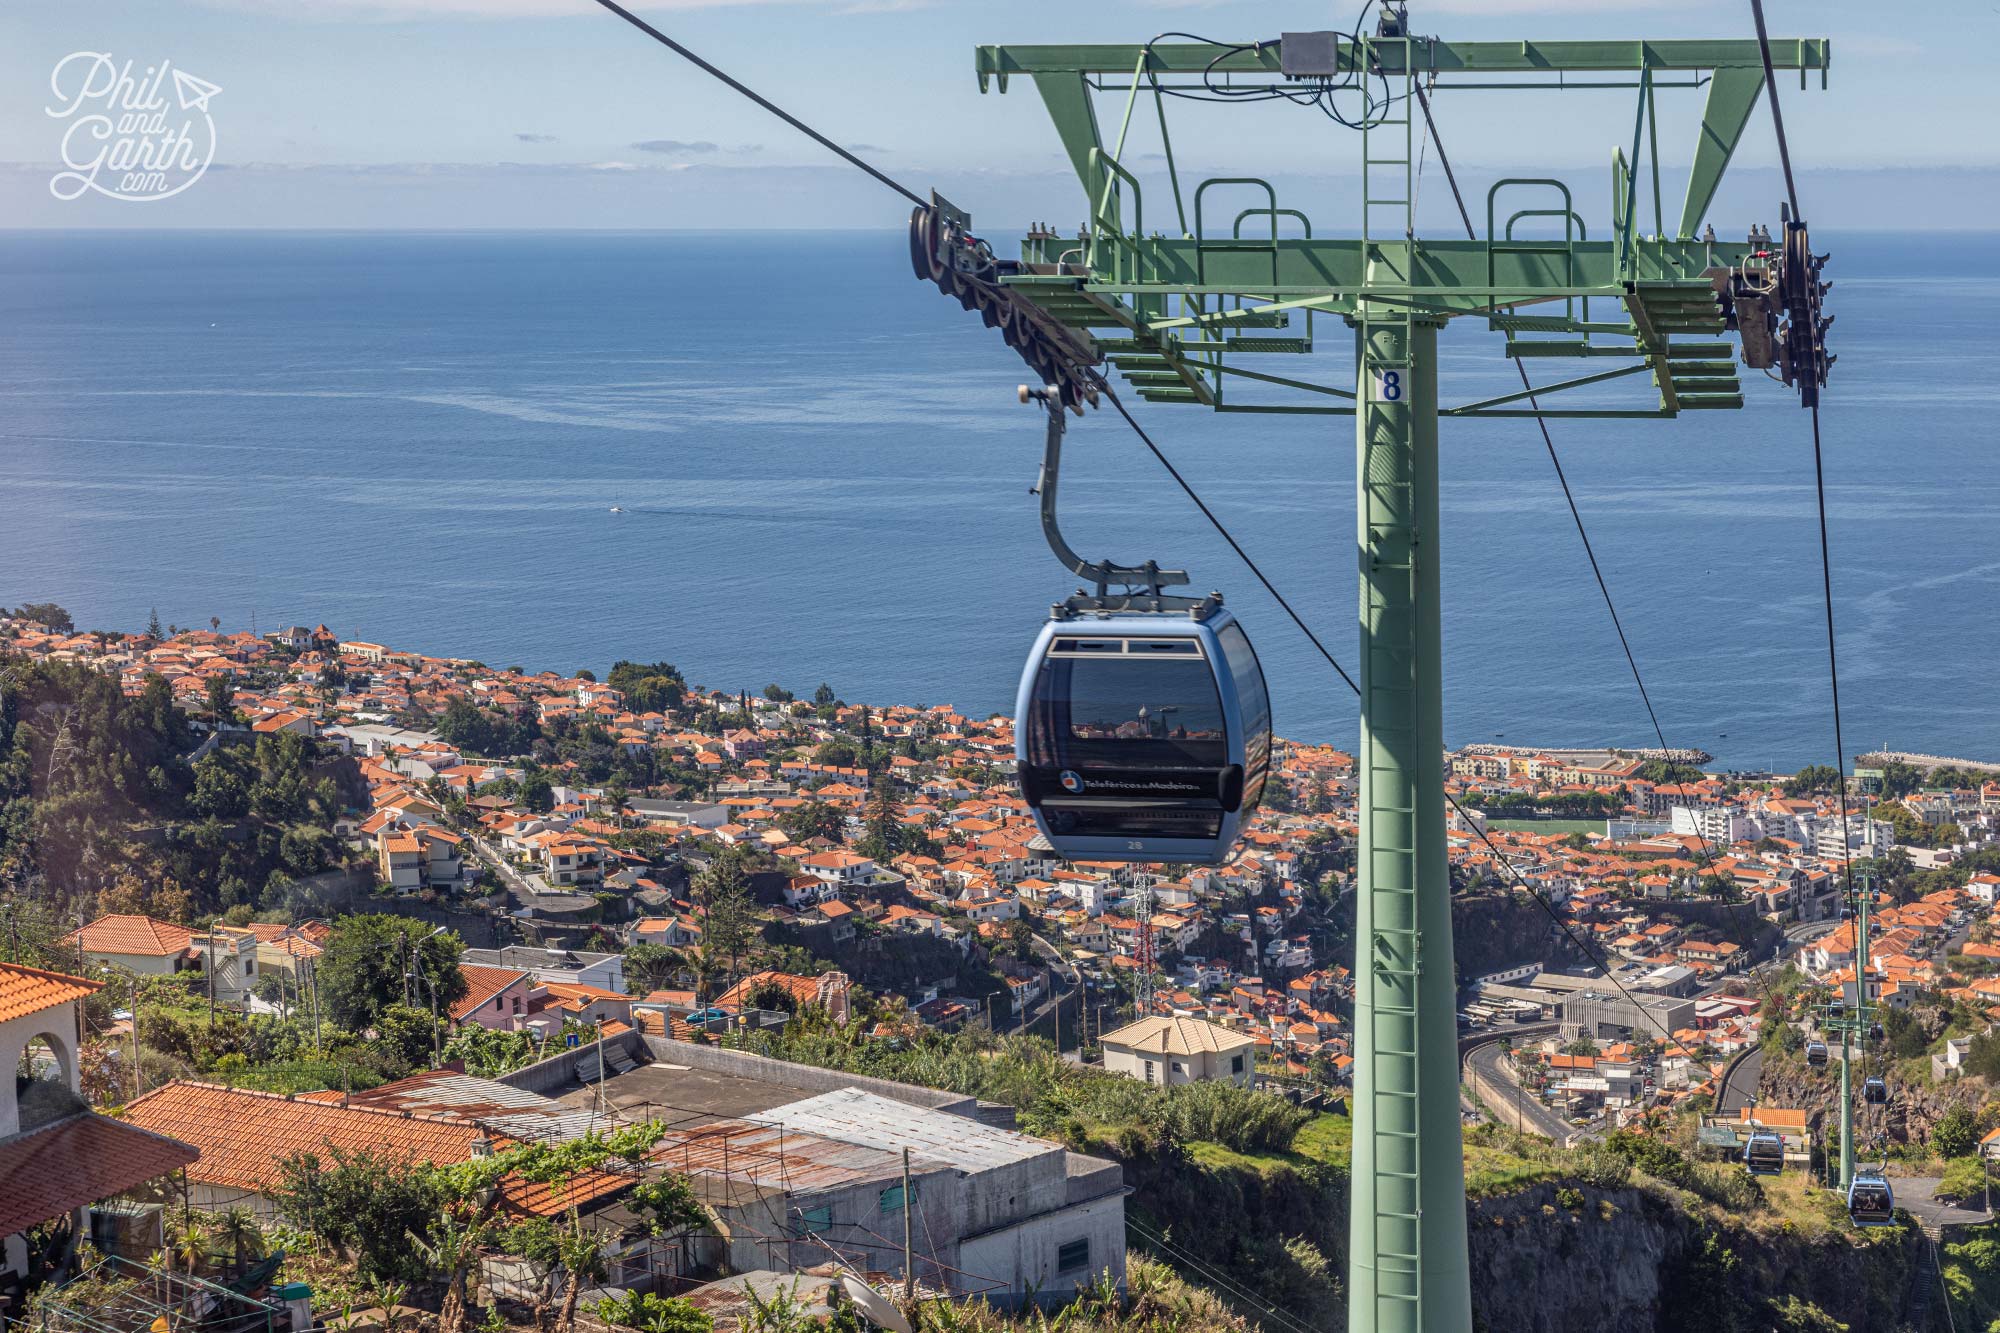 Funchal's cable car ride takes you to the hilltop neighbourhood of Monte